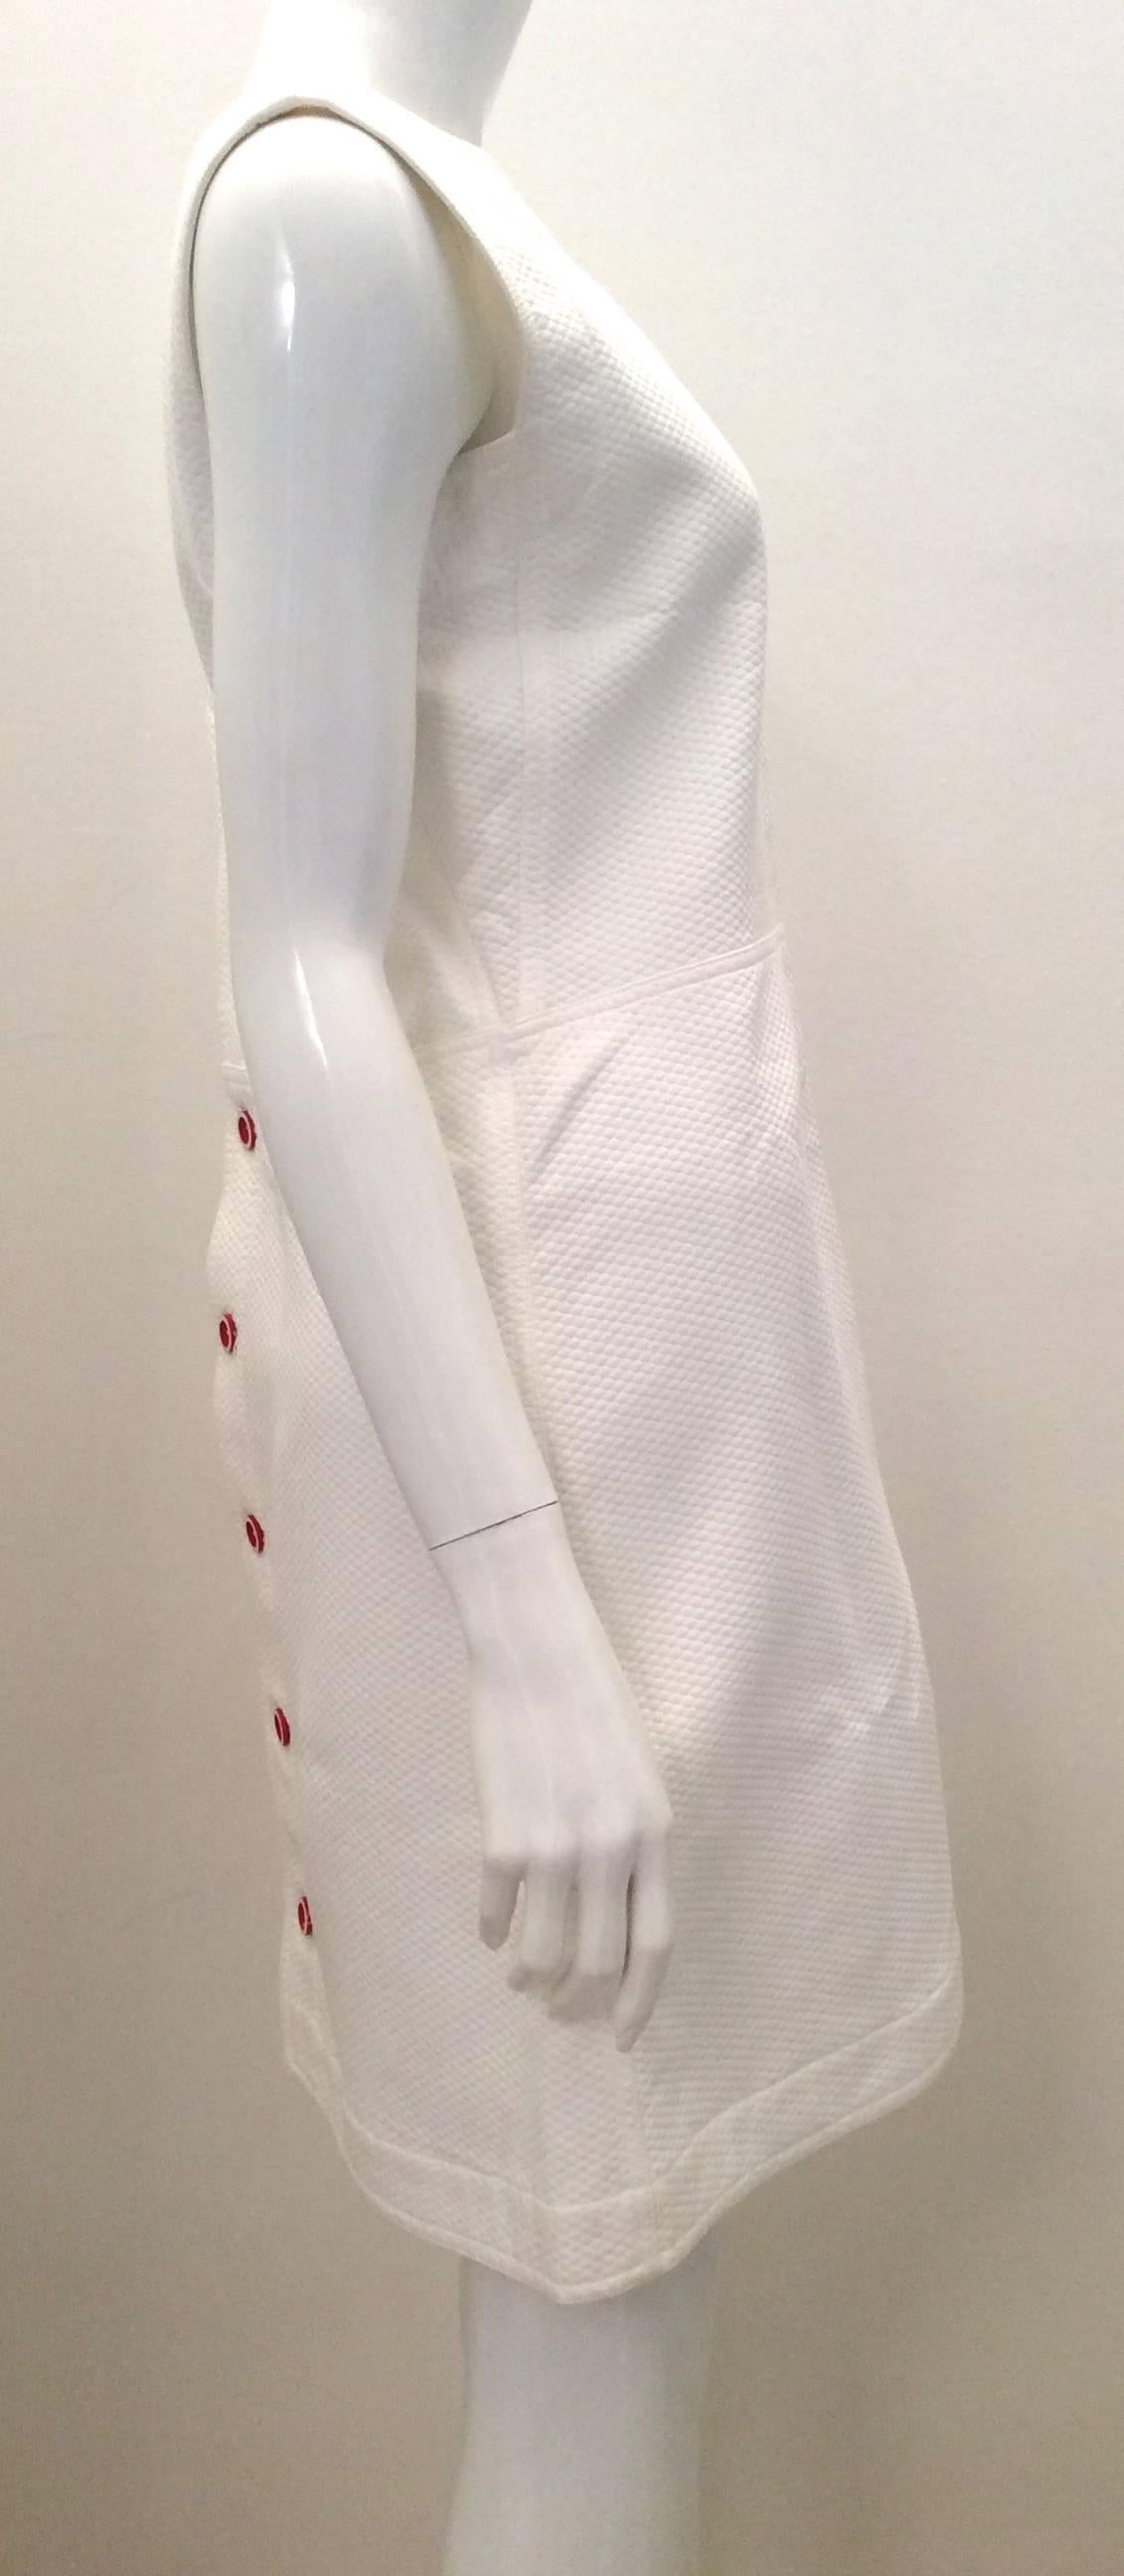 Presented here is a gorgeous dress from Courreges. The dress is made of 100% cotton. The dress is a simple cut that buttons up the back of the dress. The buttons on the dress are red. There is a red embroidered Courreges logo on the front of the